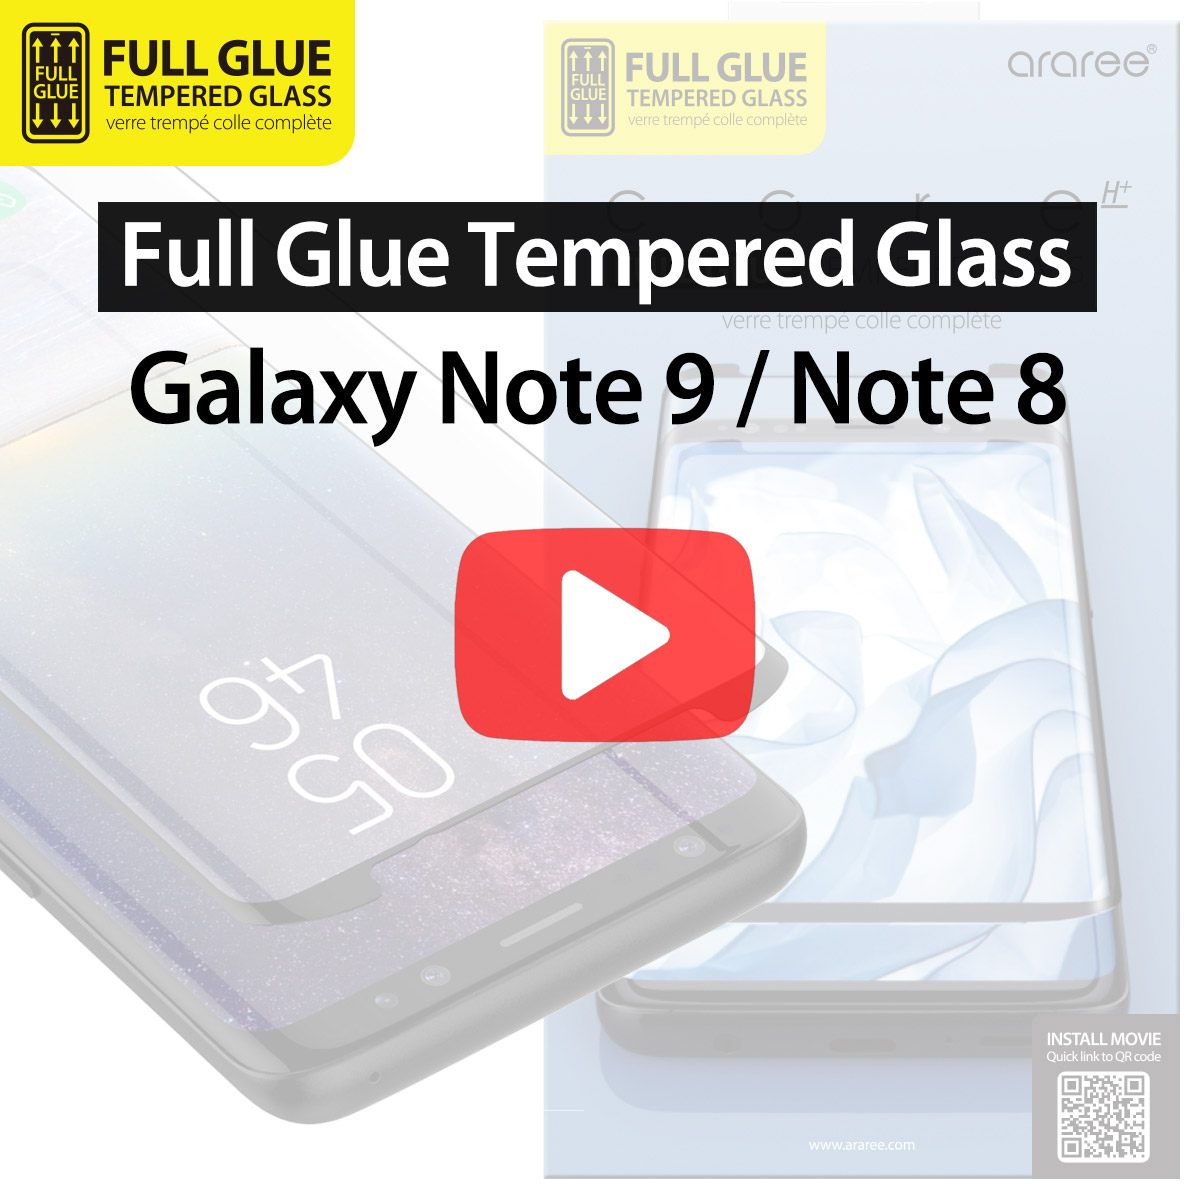 Note9/Note8 core FullGlue Tempered Glass Screen Protector Install Guide